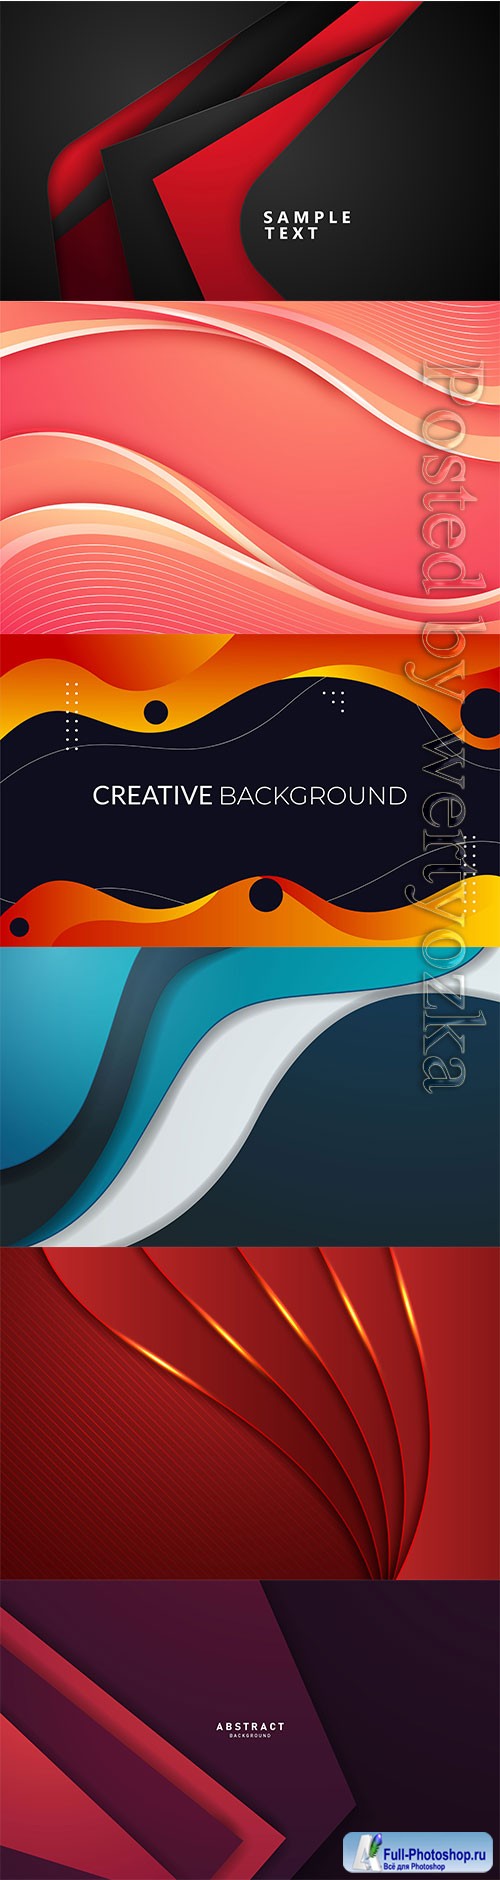 Colored abstract backgrounds with lines in vector